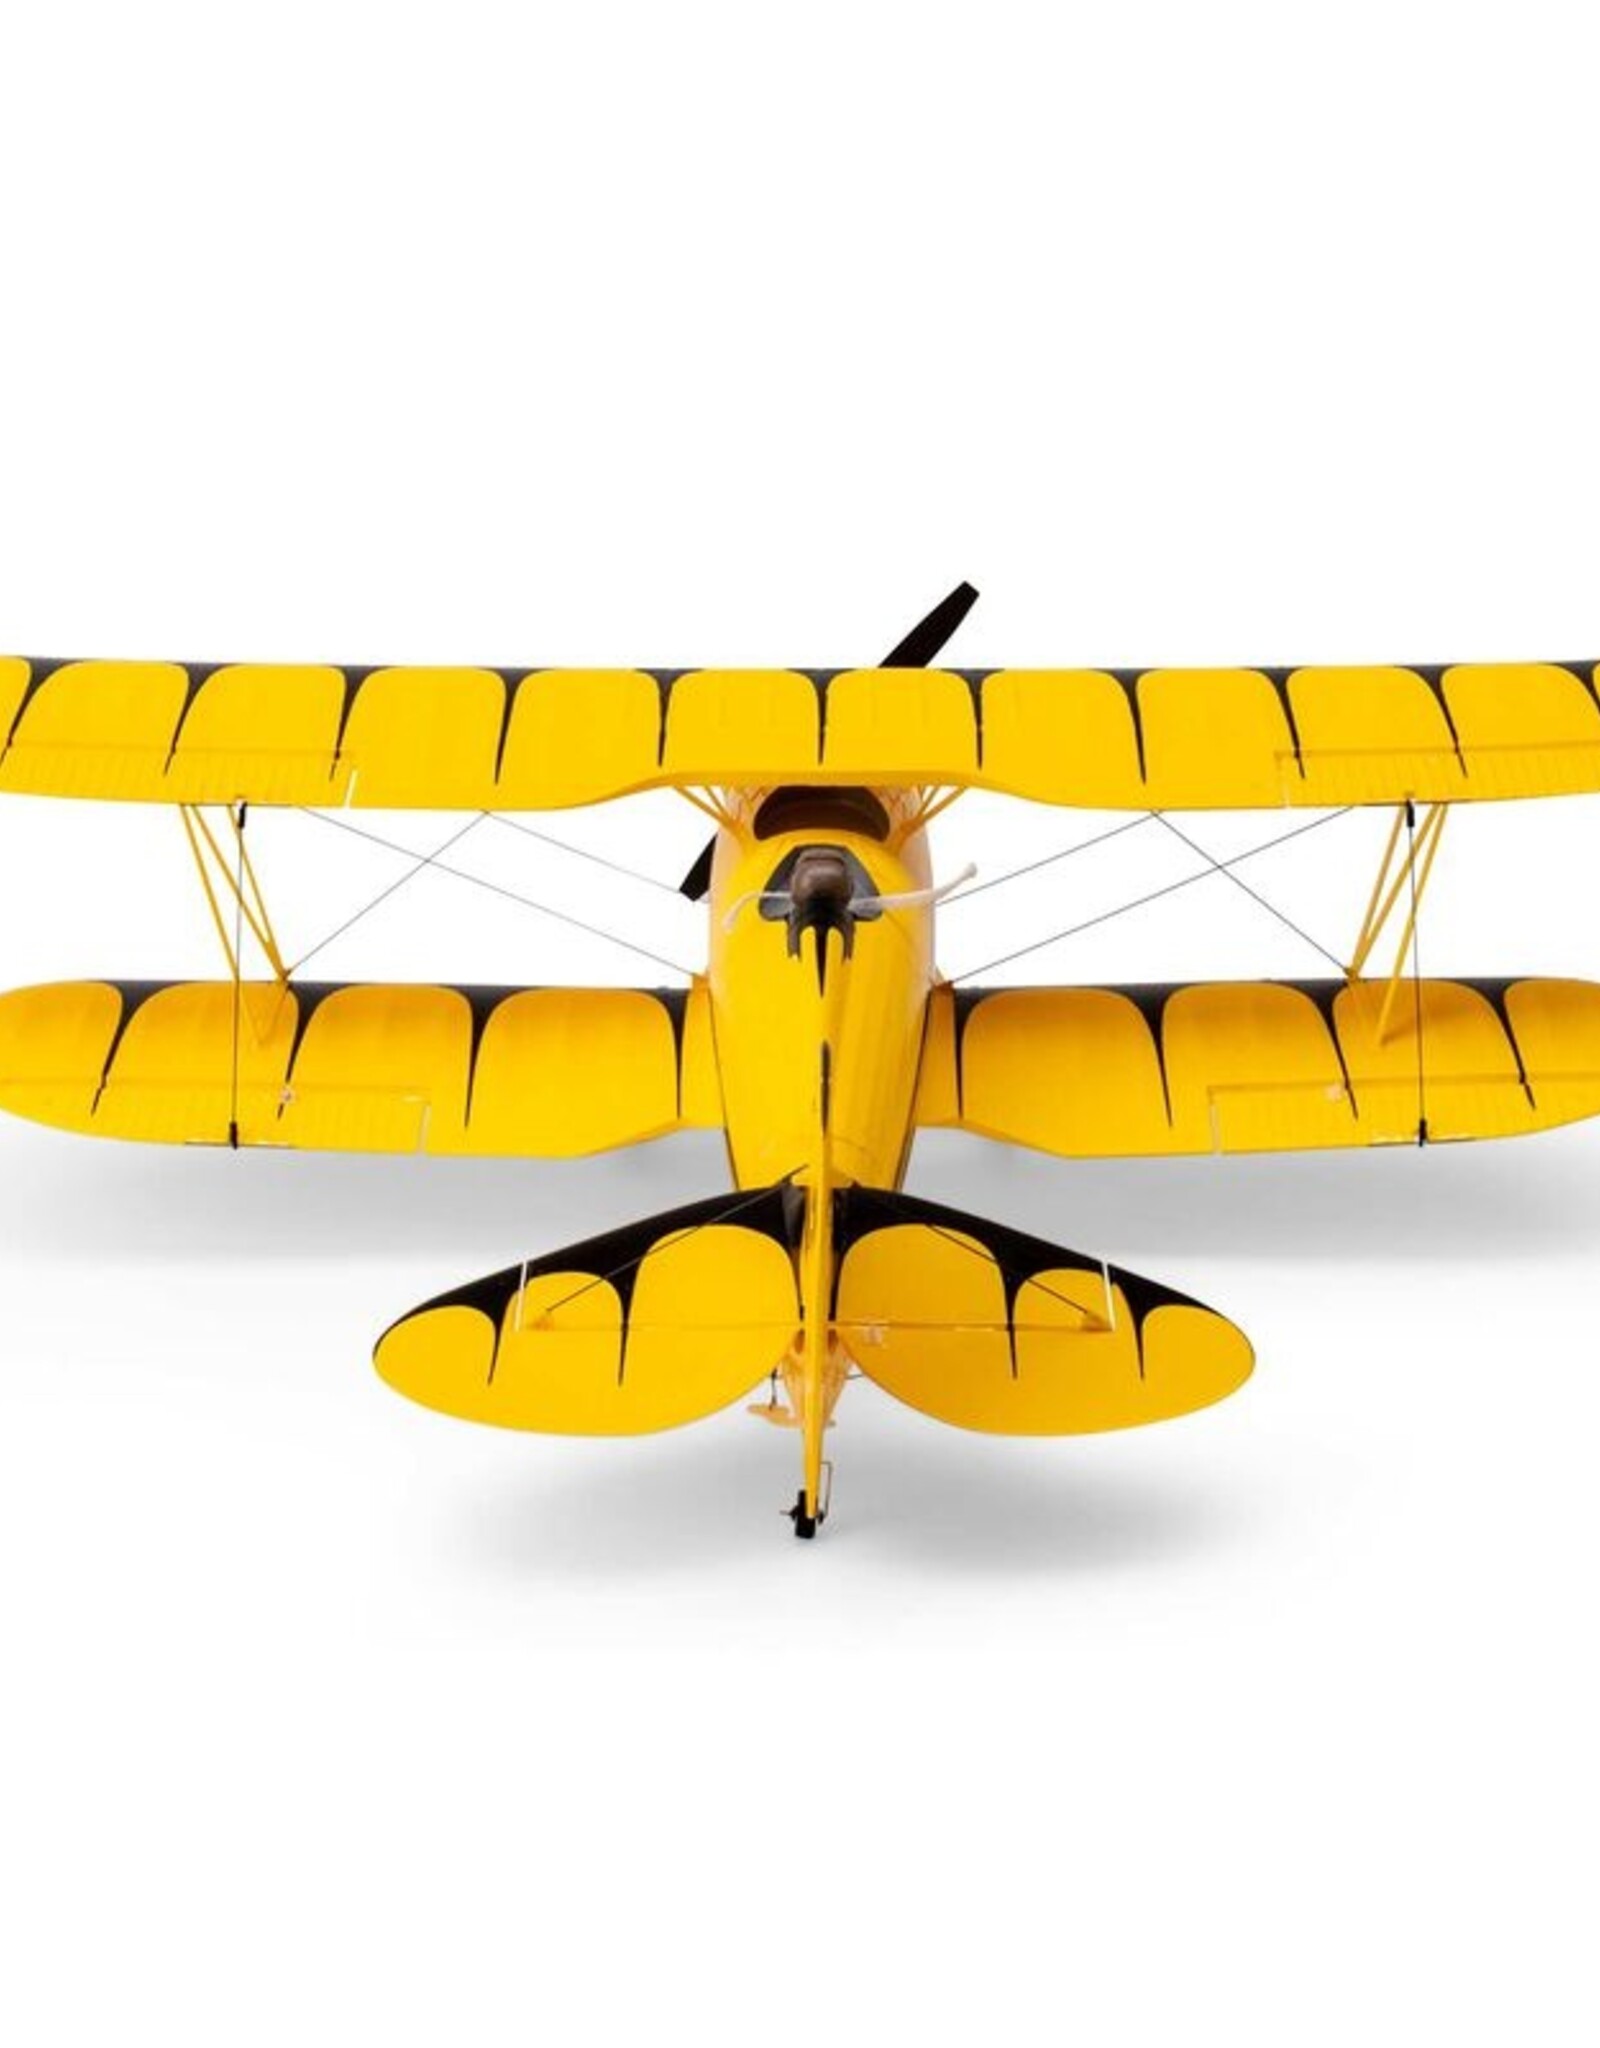 eflite EFLU53550Y UMX WACO BNF Basic with AS3X and SAFE Select, Yellow